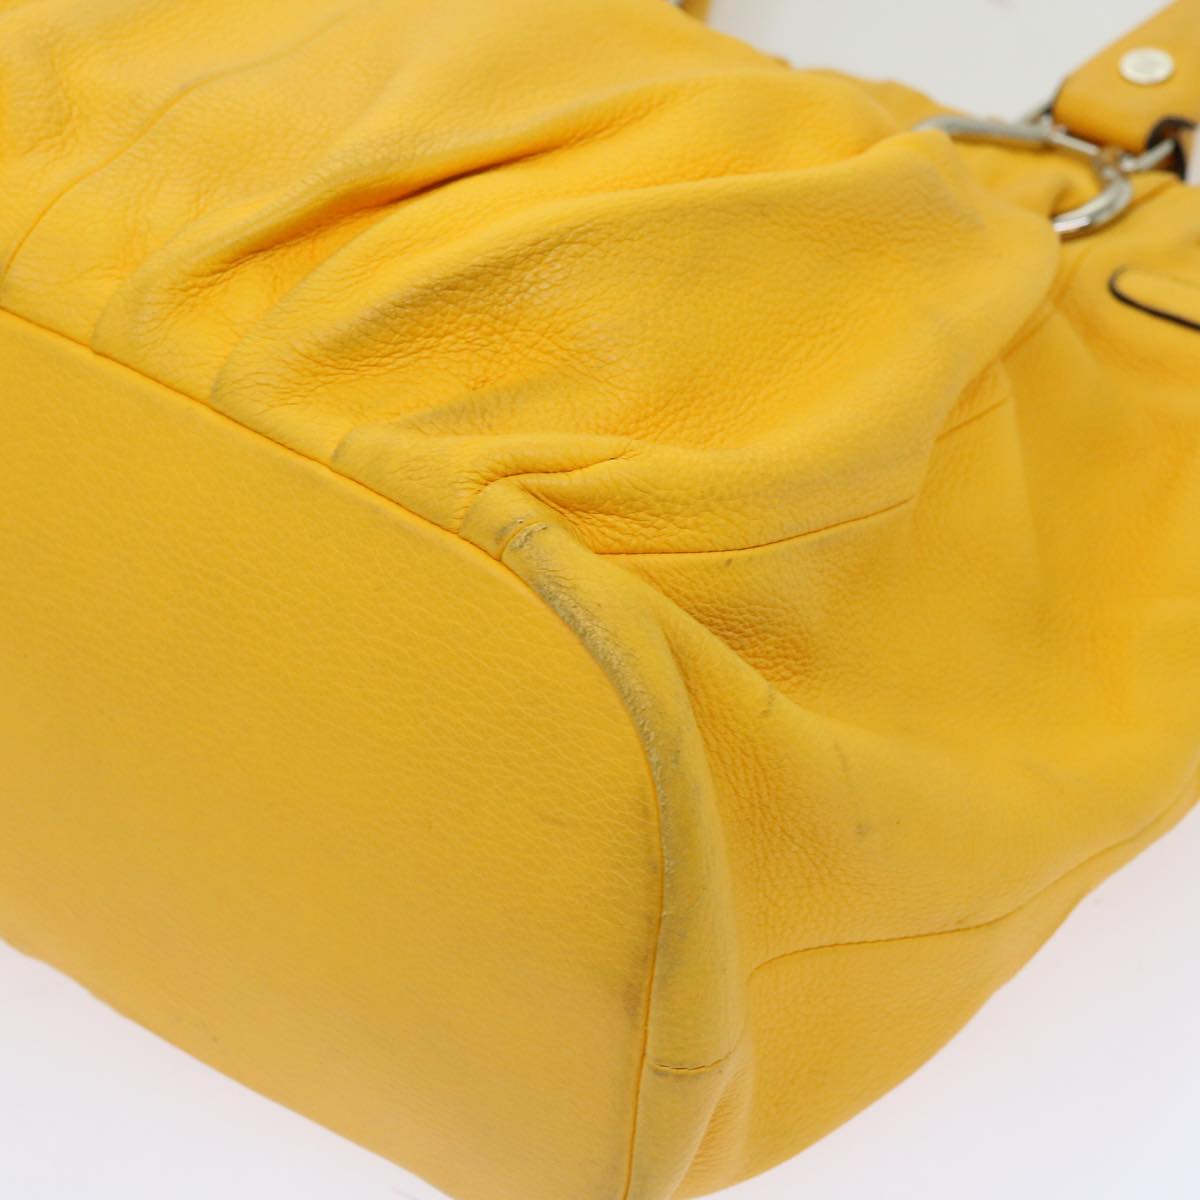 CELINE Tote Bag Leather Yellow Auth bs13073